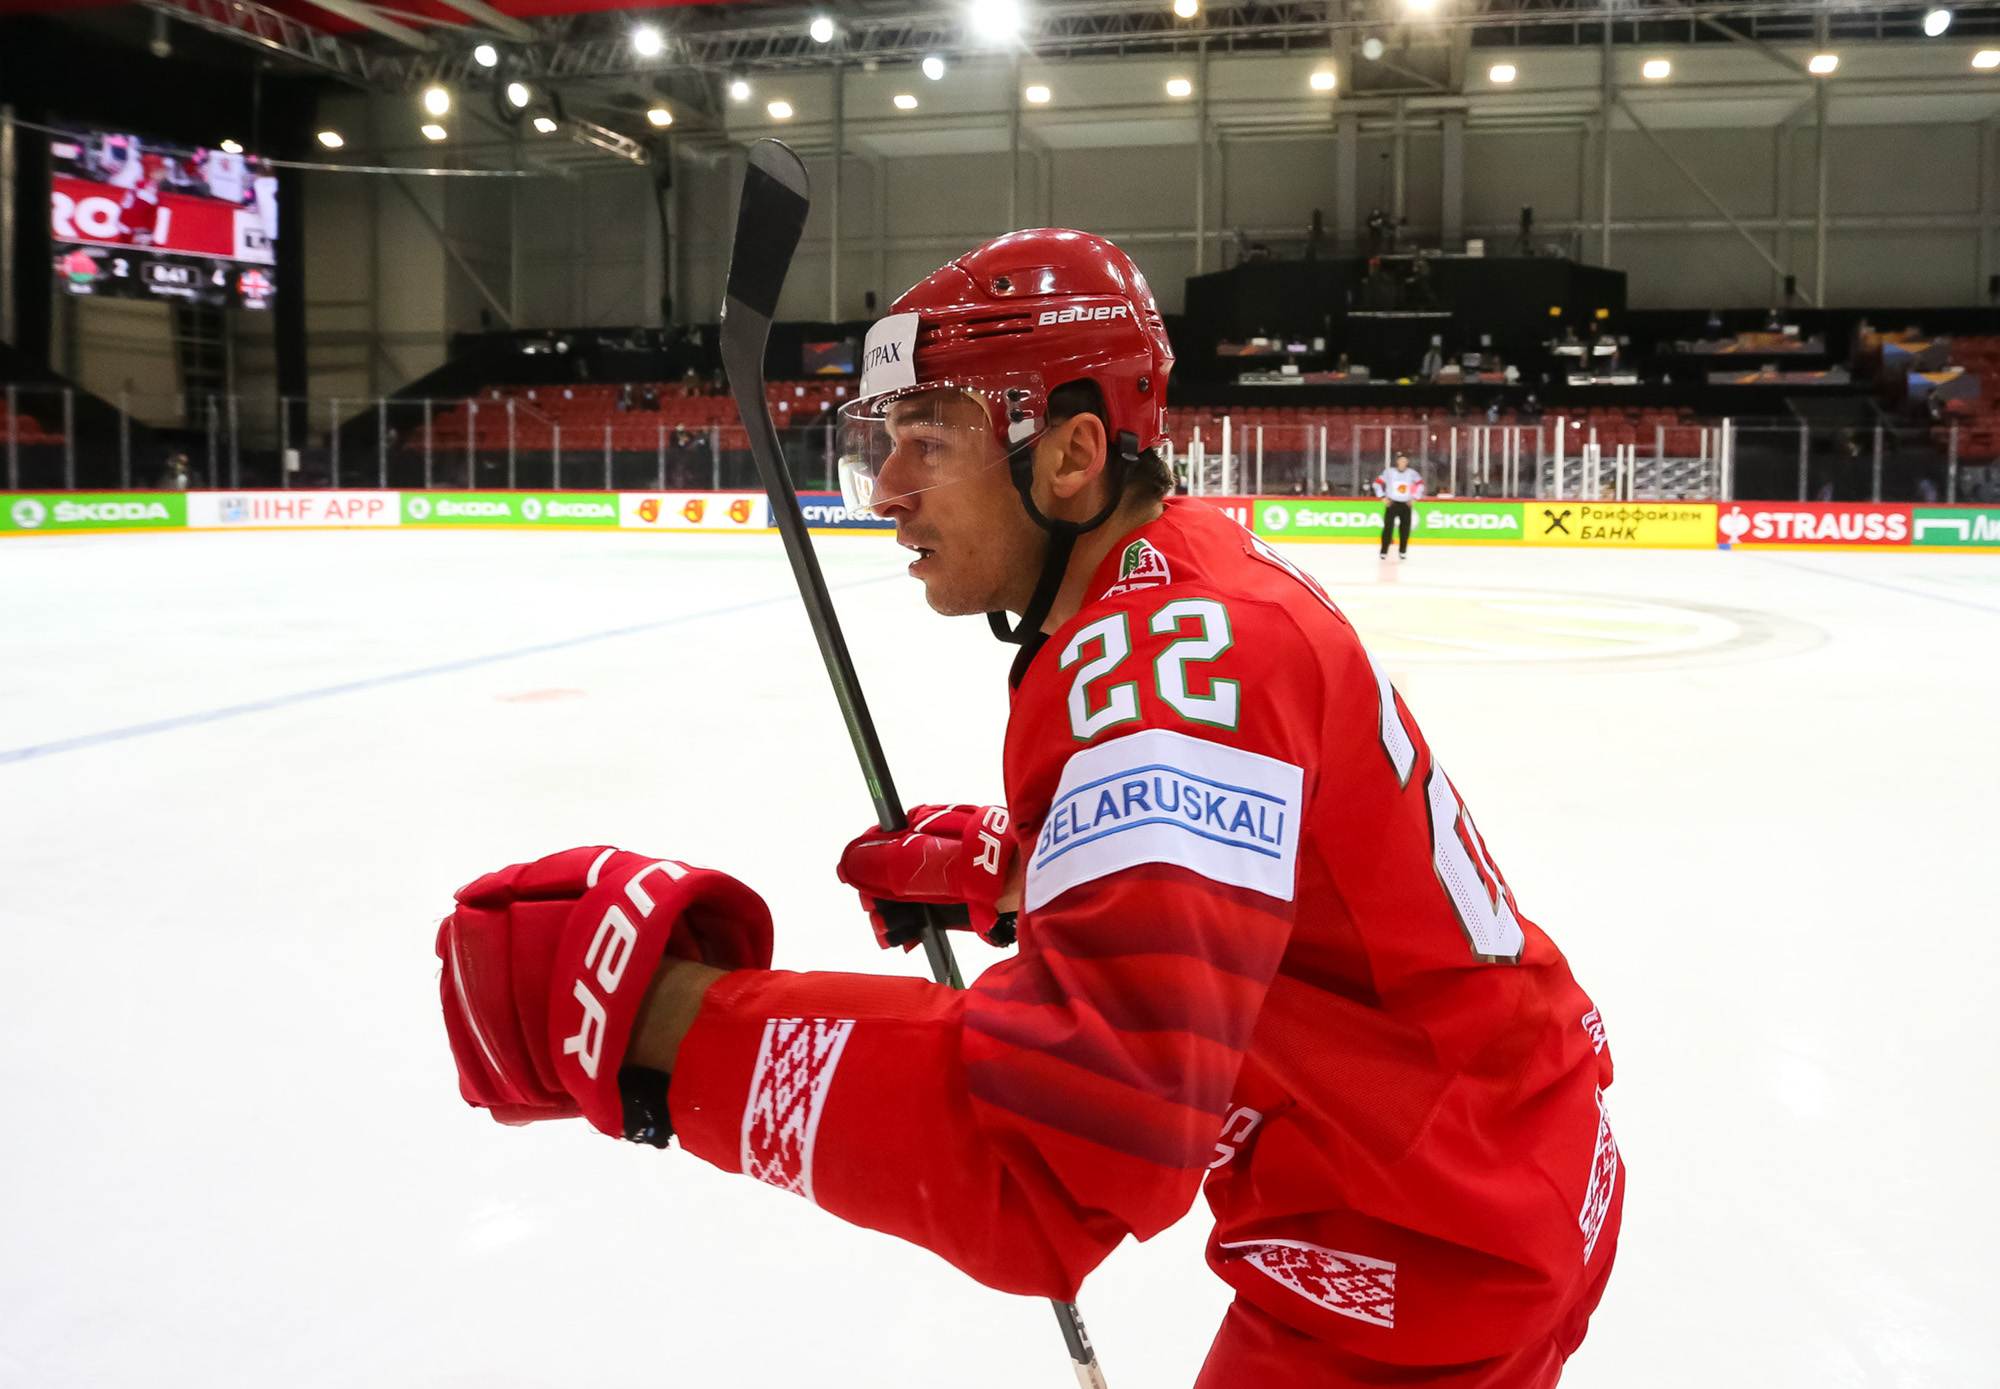 Team GB Ice Hockey on Twitter: Defenceman Paul Swindlehurst has been named  in the Great Britain team for the @IIHFHockey @IIHFWorlds2021 next month.  The 27-year-old, who has recovered from injury, completes GB's